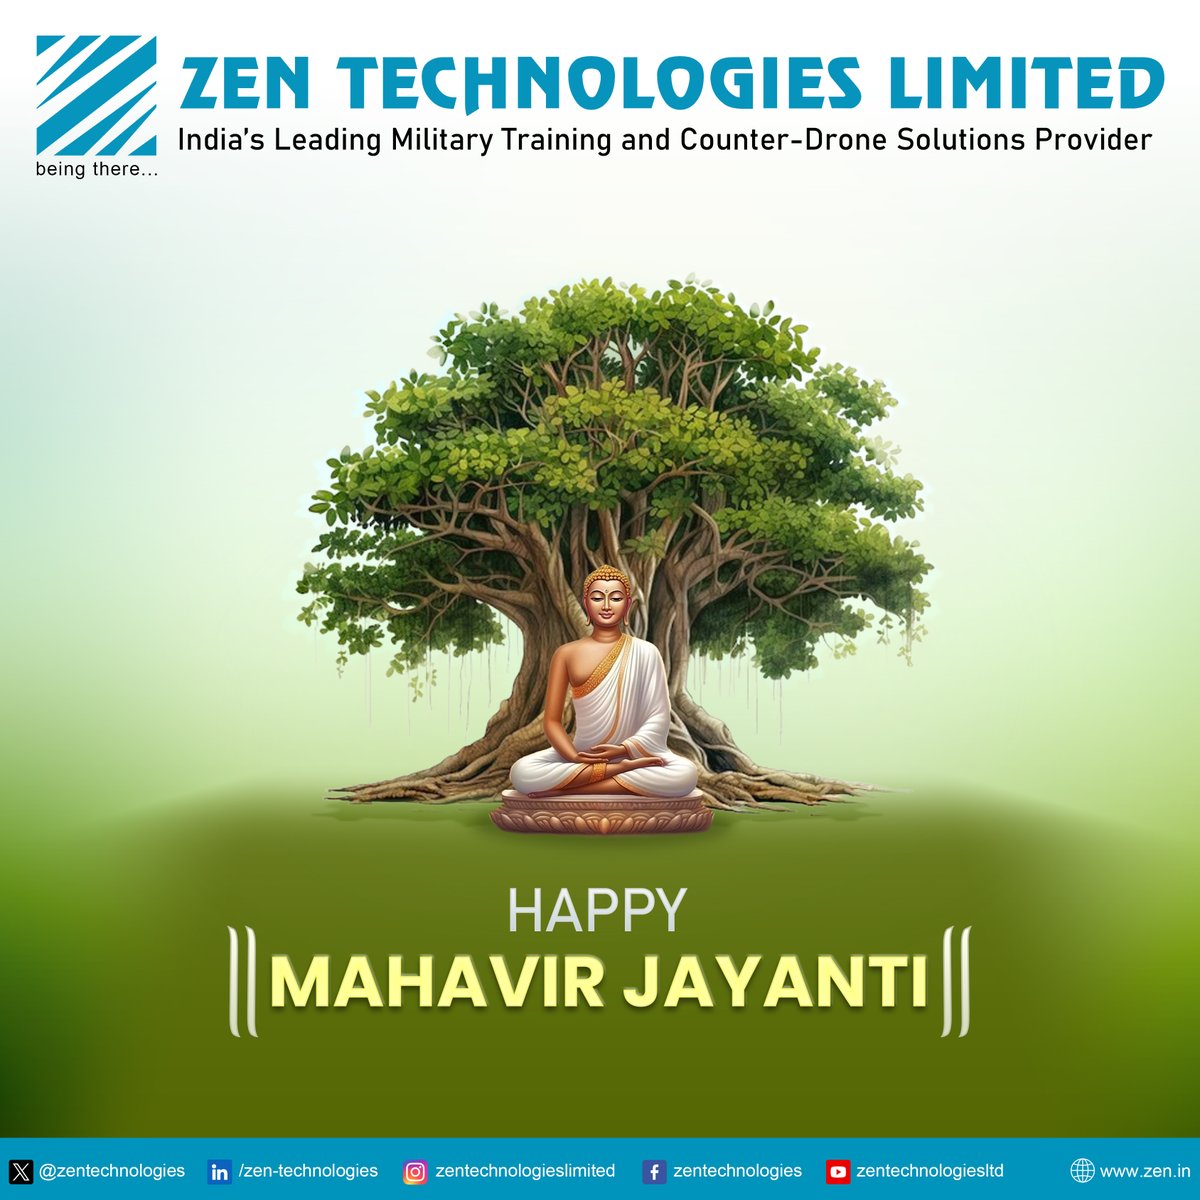 @ZenTechnologies extends heartfelt wishes to all valued customers and esteemed stakeholders a blessed #MahavirJayanti. May the teachings of Lord Mahavir inspire us all to lead a life of #righteousness and #compassion. #MahavirJayanti2024 #MahavirJanmKalyanak #ZenTec #Beingthere